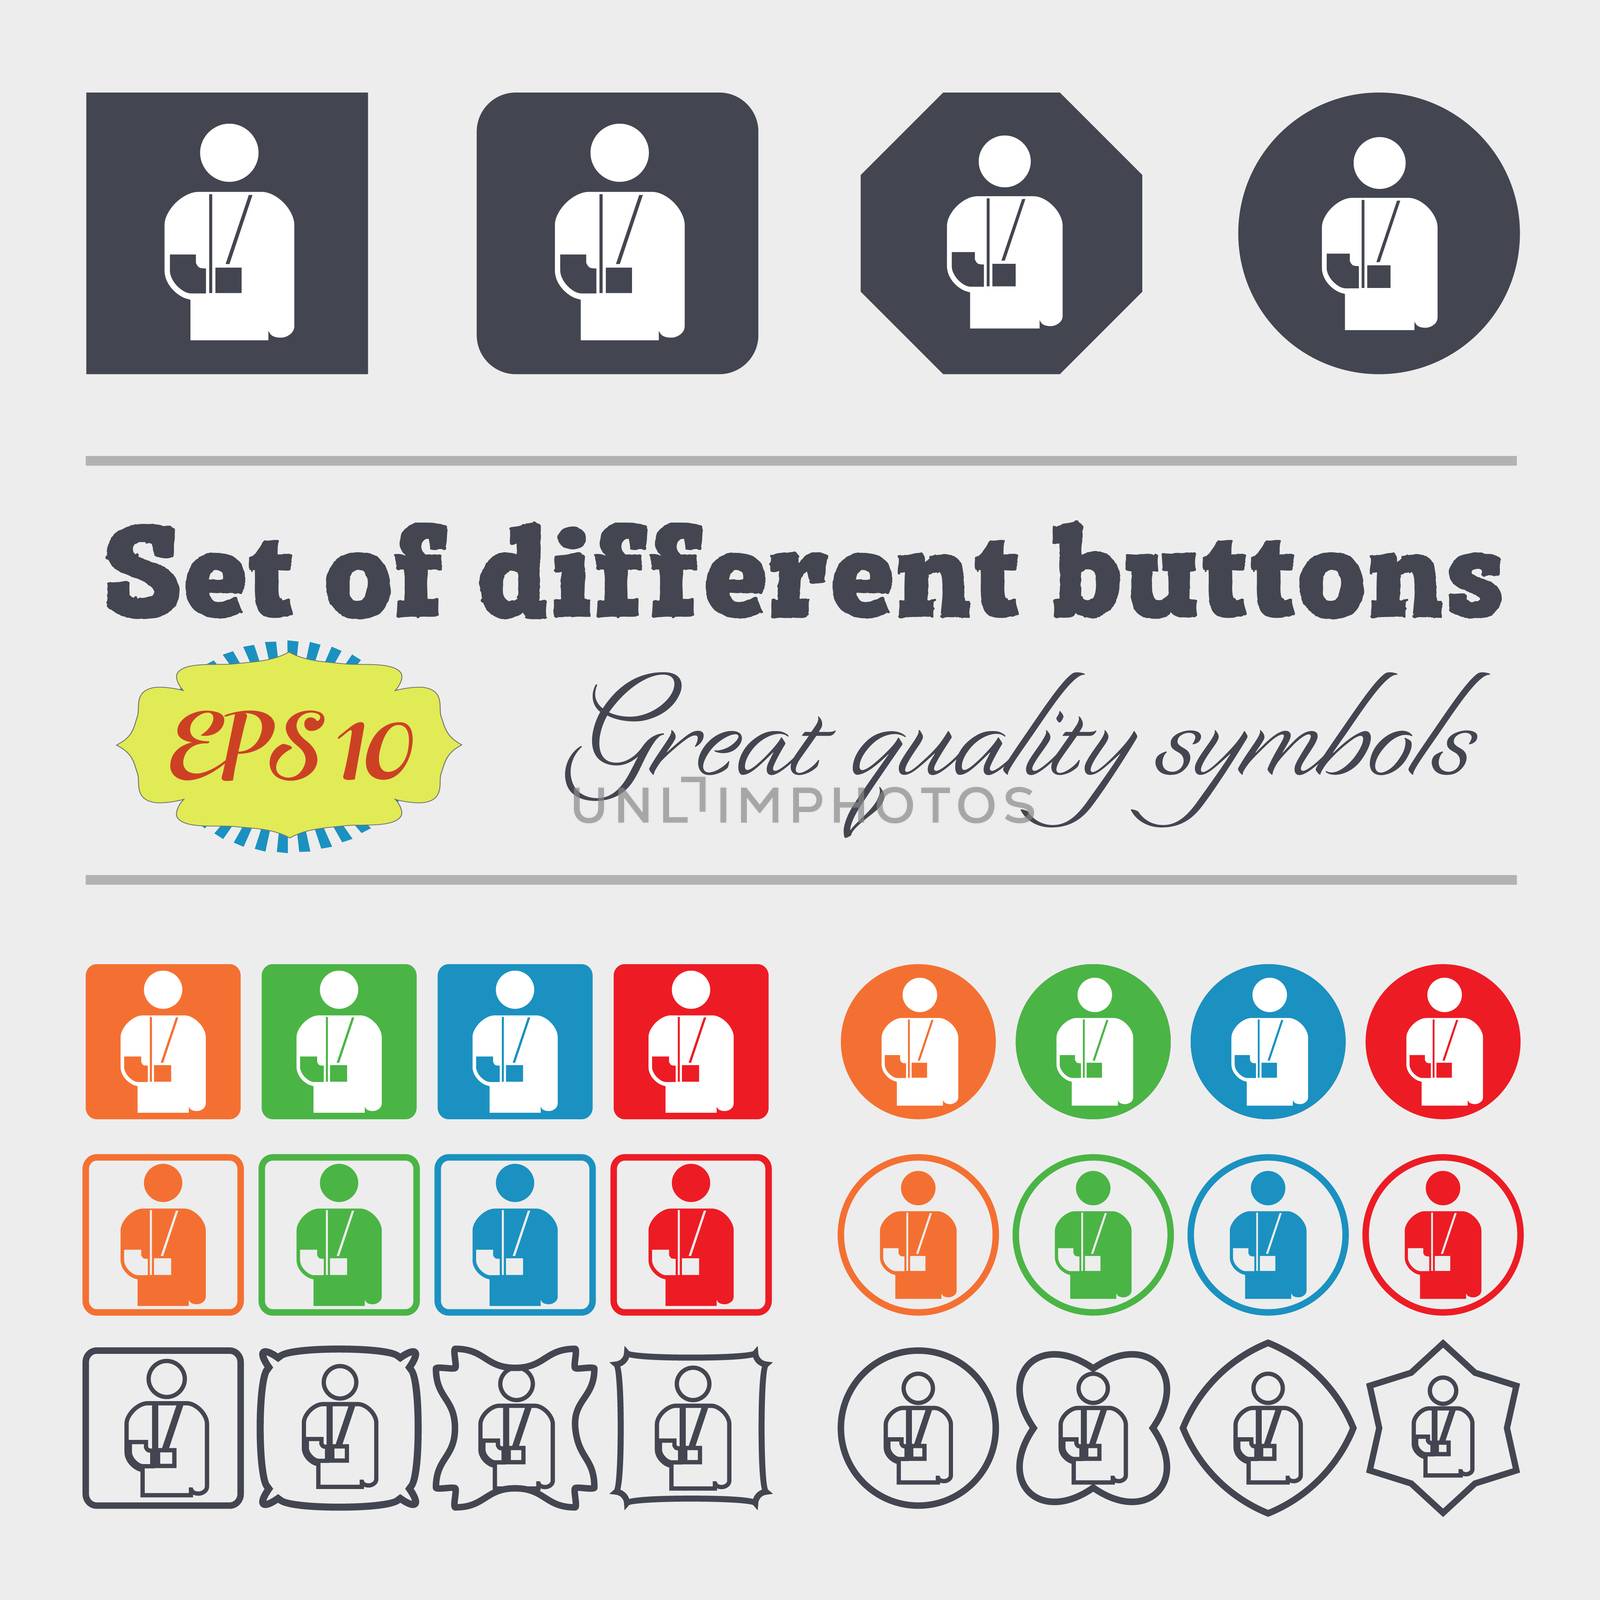 broken arm, disability icon sign. Big set of colorful, diverse, high-quality buttons. illustration